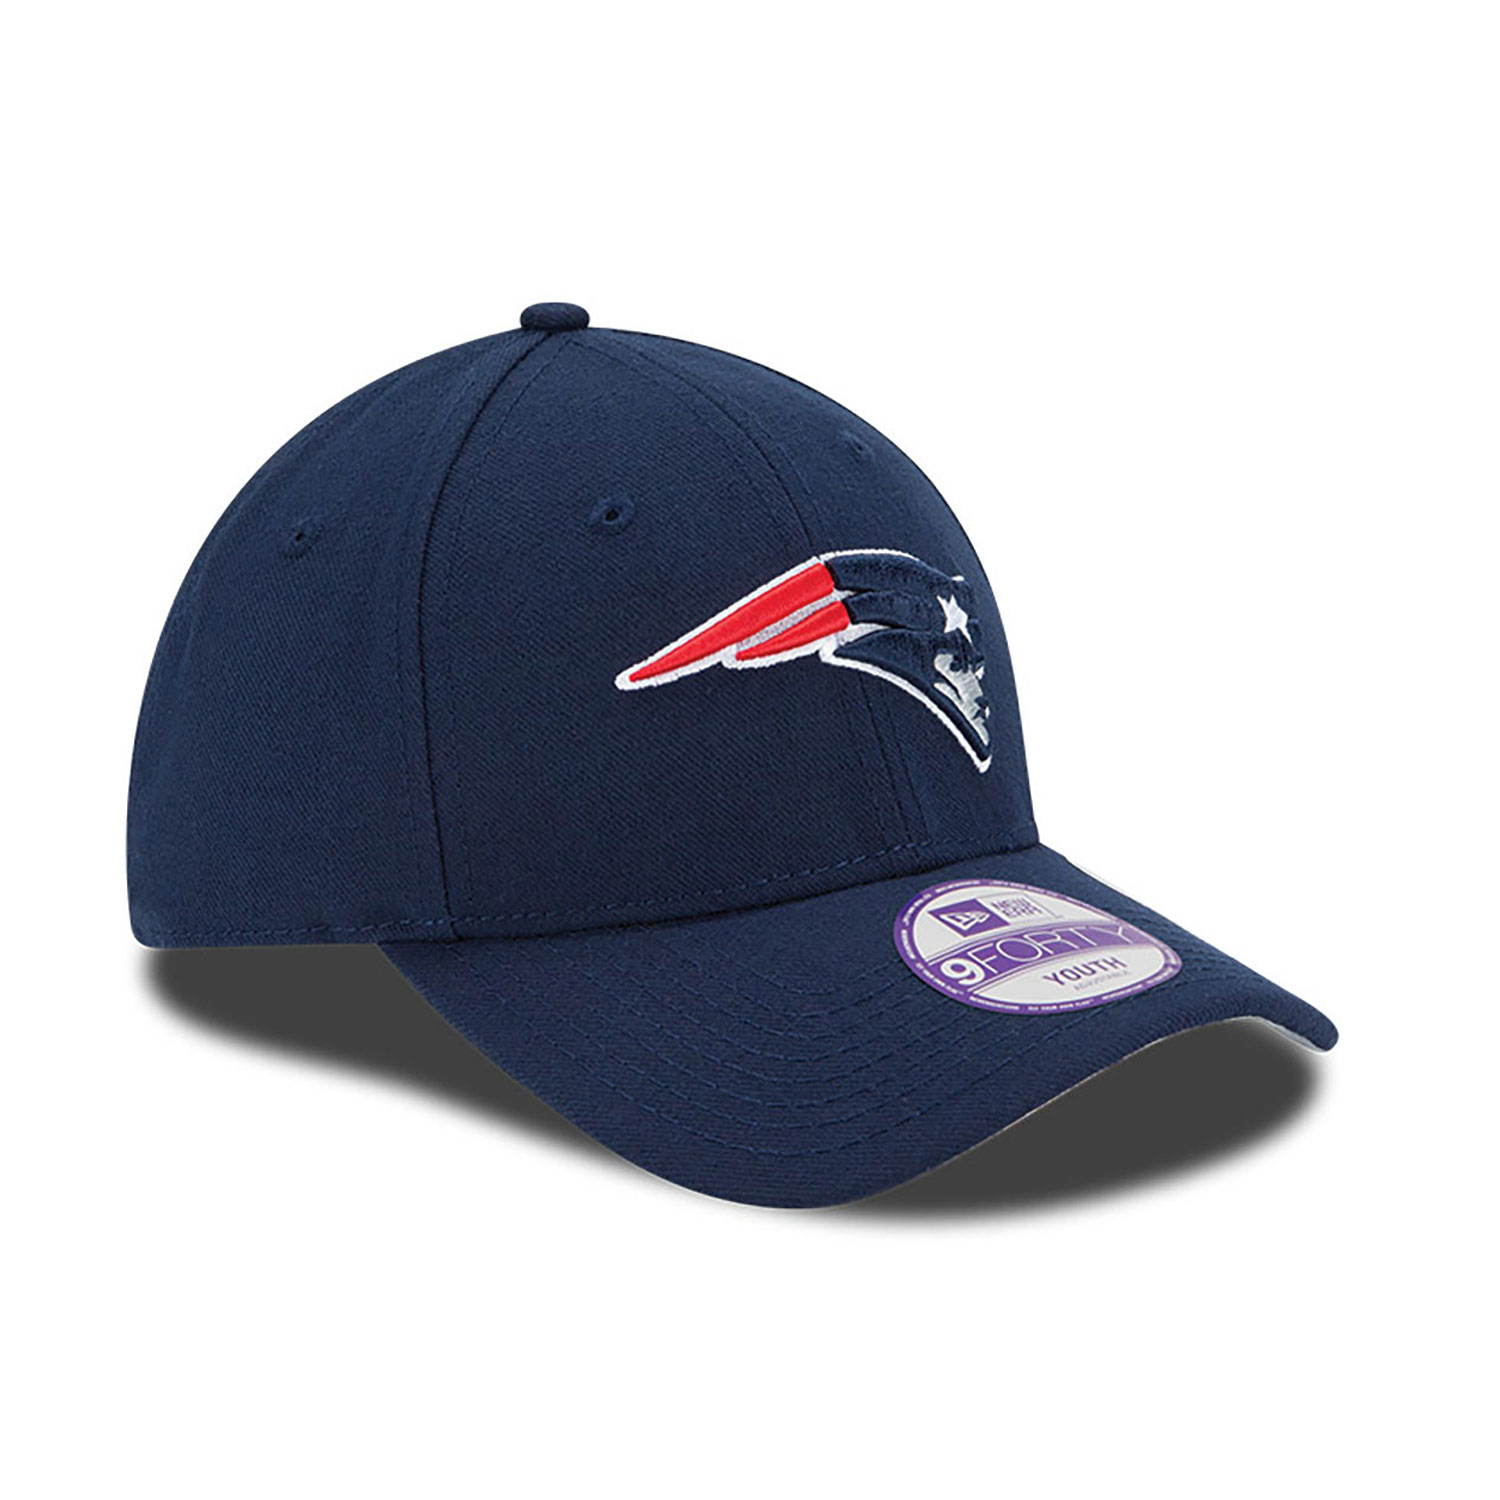 New England Patriots Youth The League Dark Blue 9FORTY Adjustable Cap